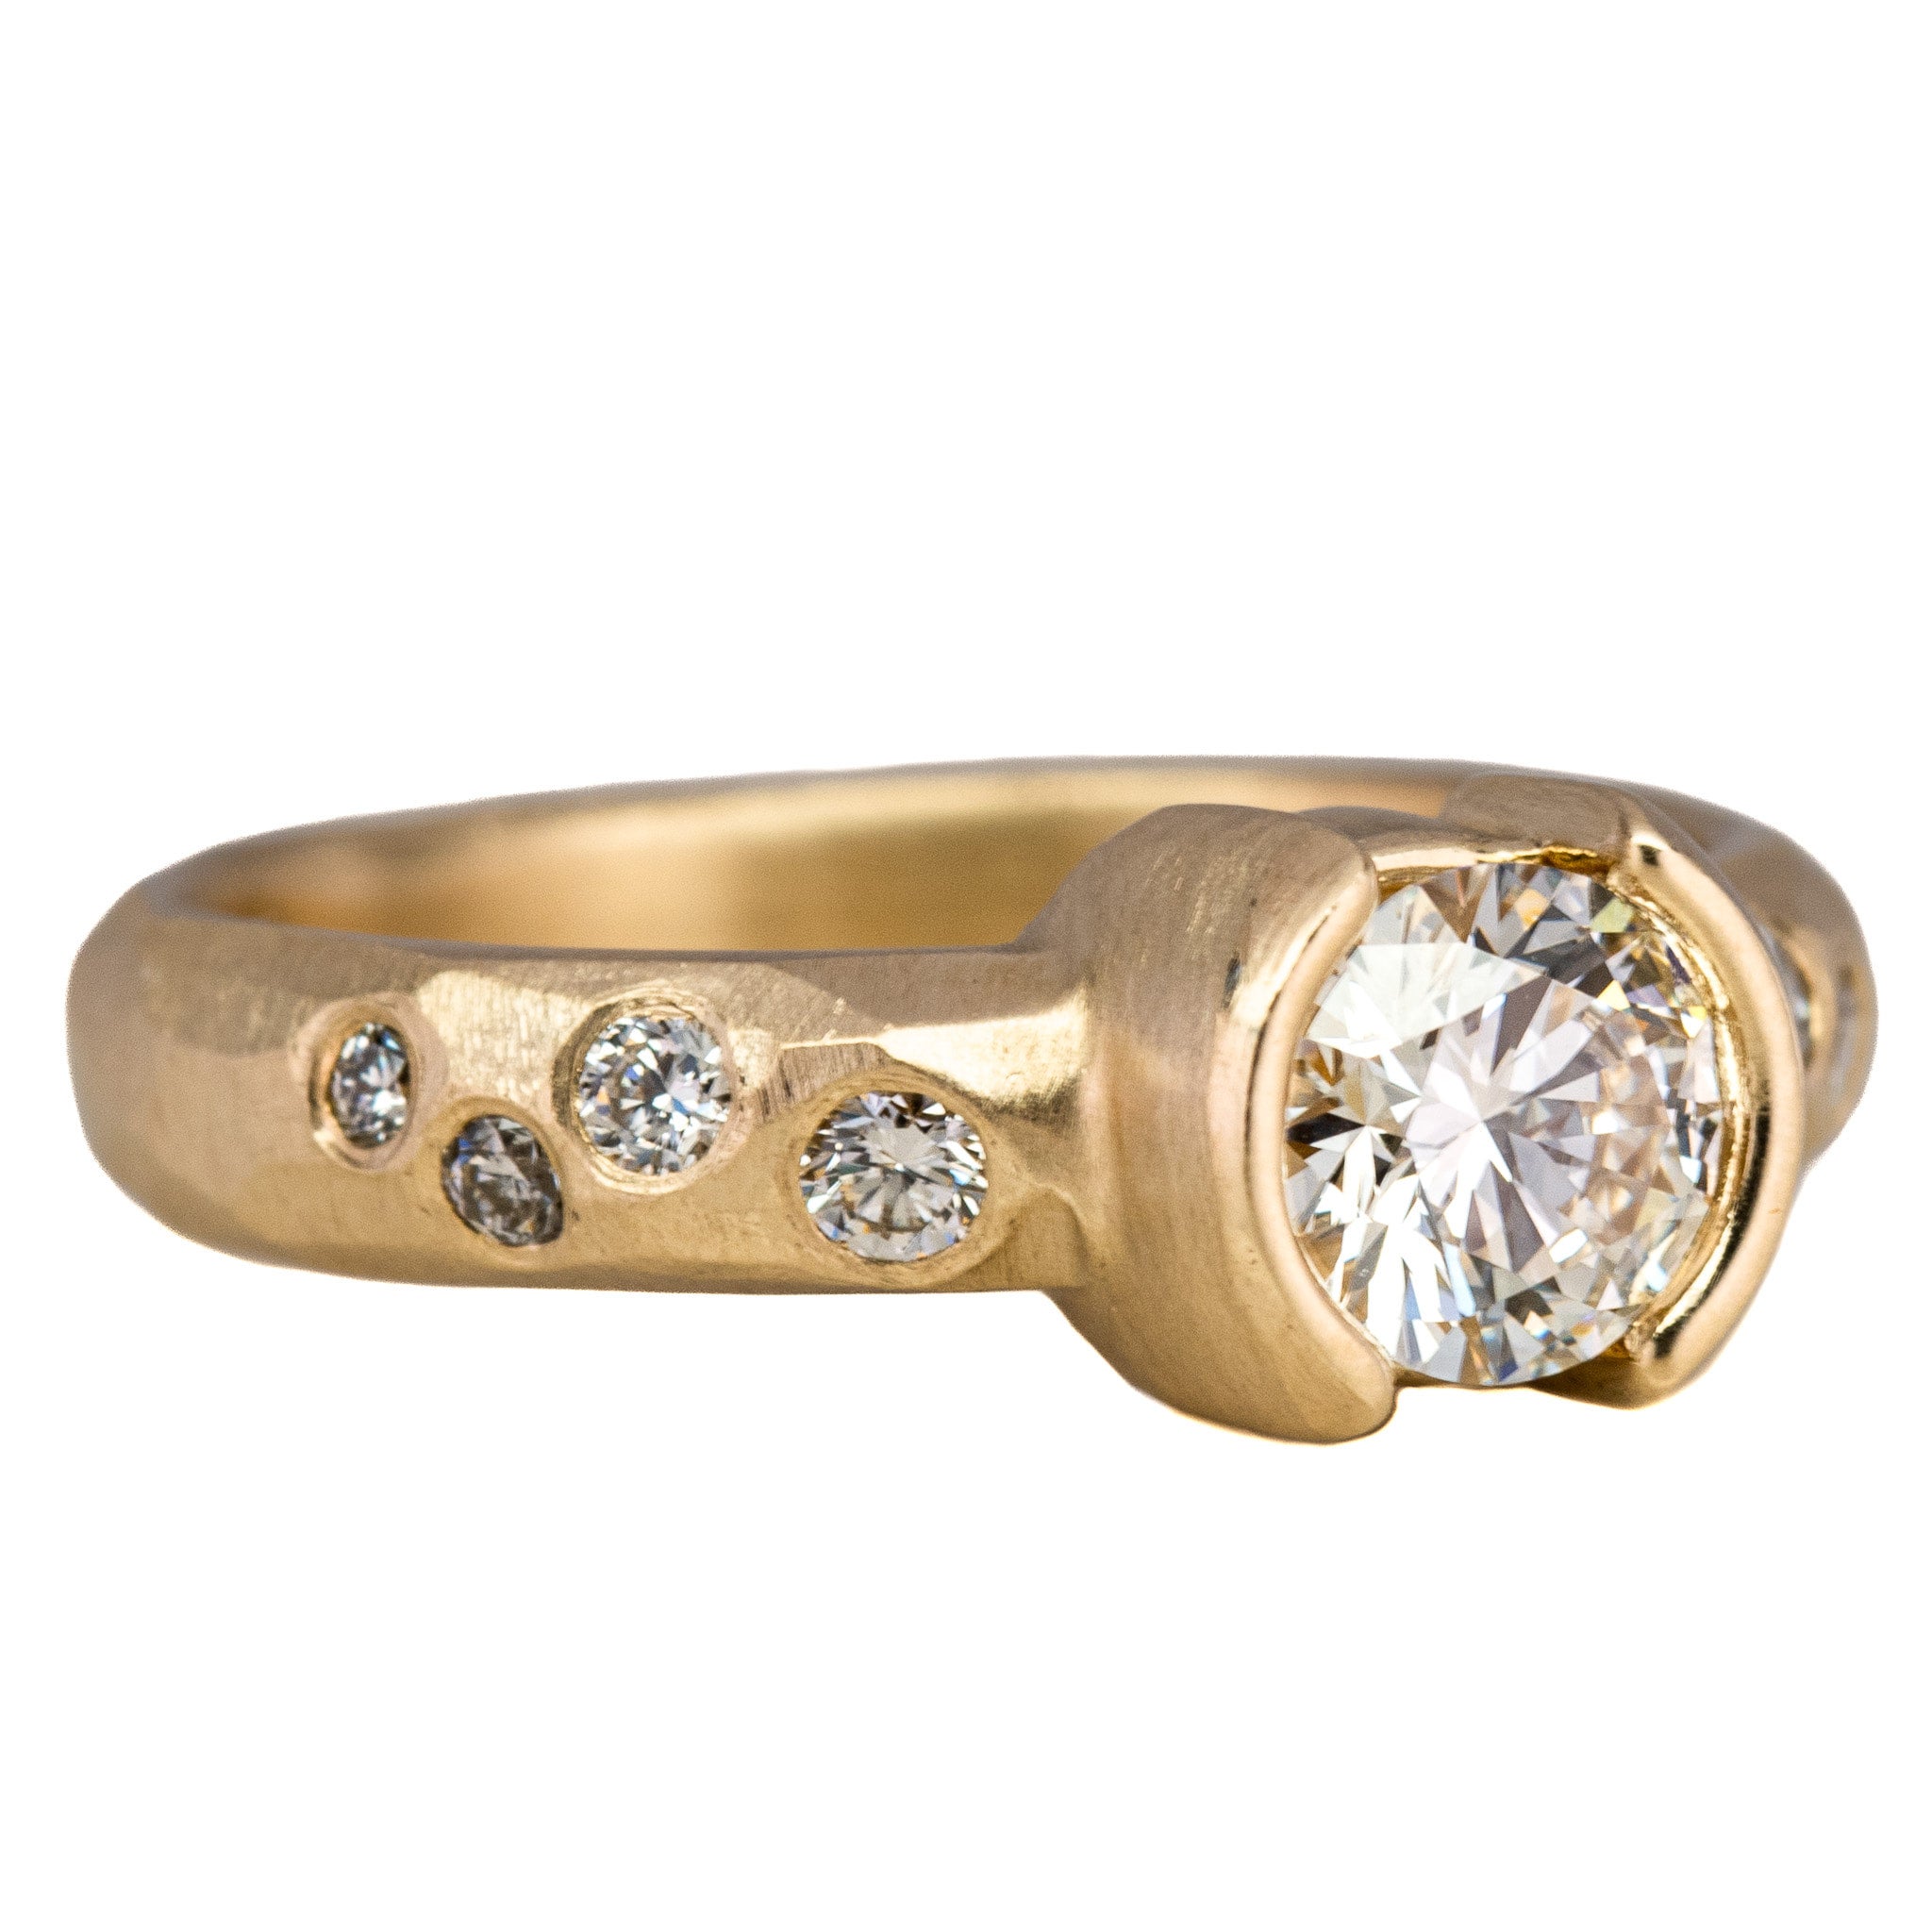 Heart Shaped Diamond Rings Collection in 14K, 18K & 22K Gold